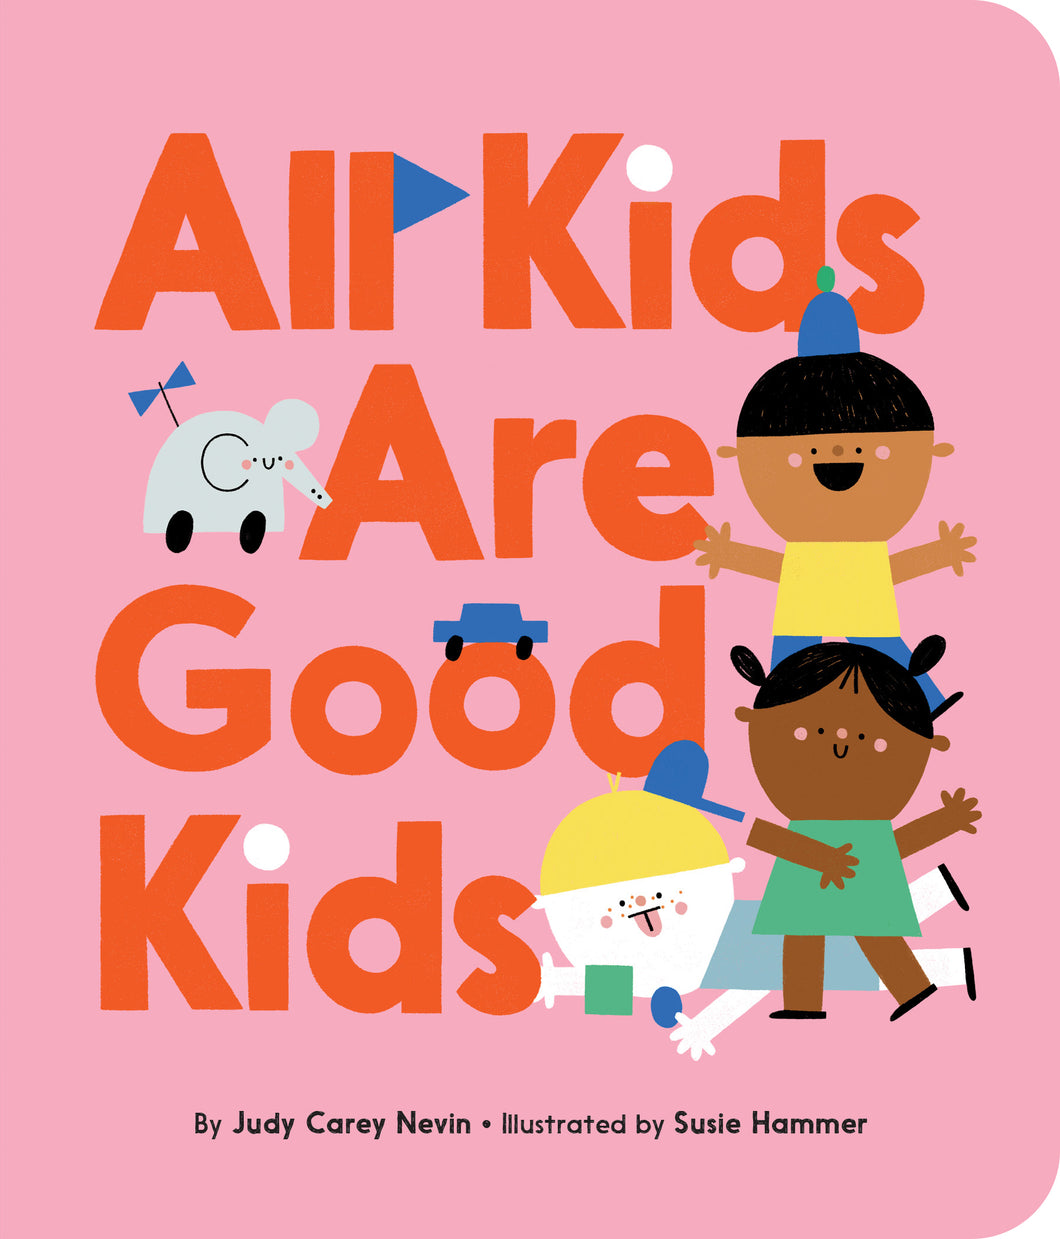 All Kids Are Good Kids - small board book